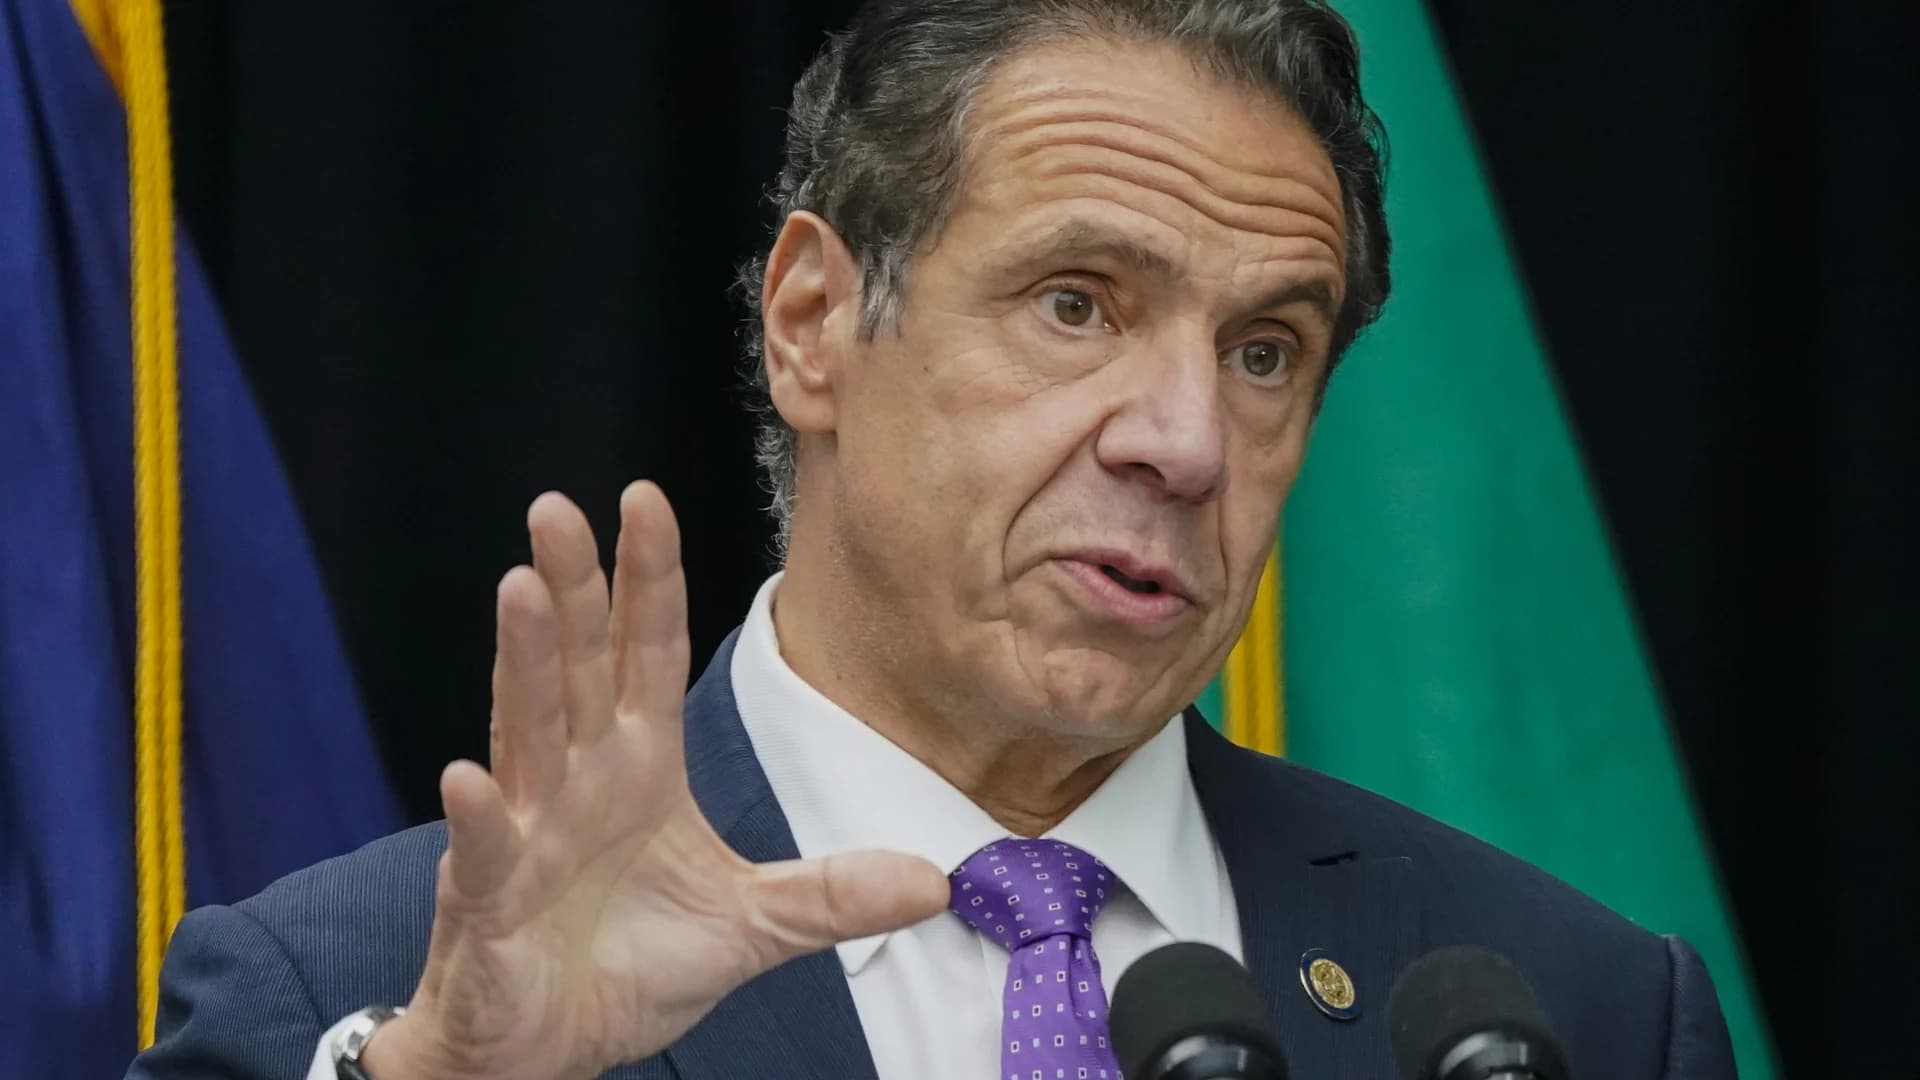 'New phase of the virus': Gov. Cuomo says he expects infection rates to go up through fall and winter